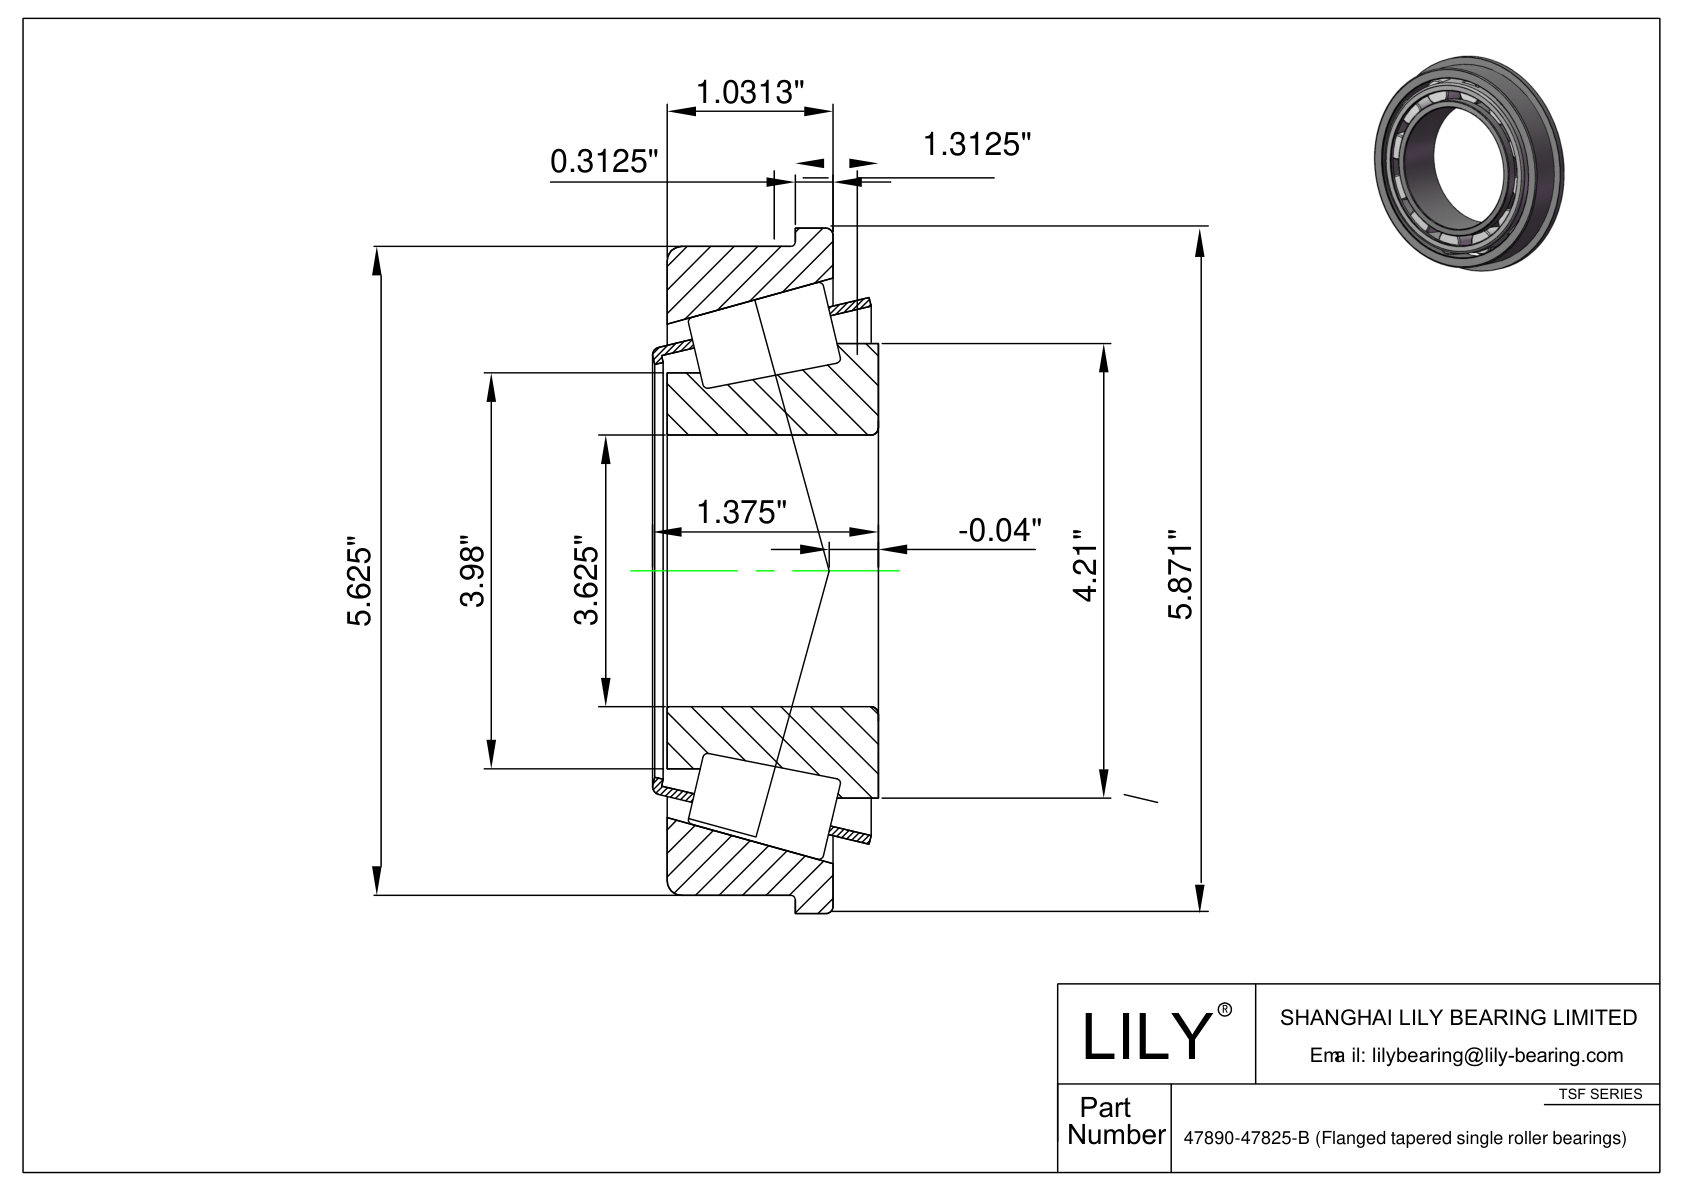 47890-47825-B TSF (Tapered Single Roller Bearings with Flange) (Imperial) cad drawing